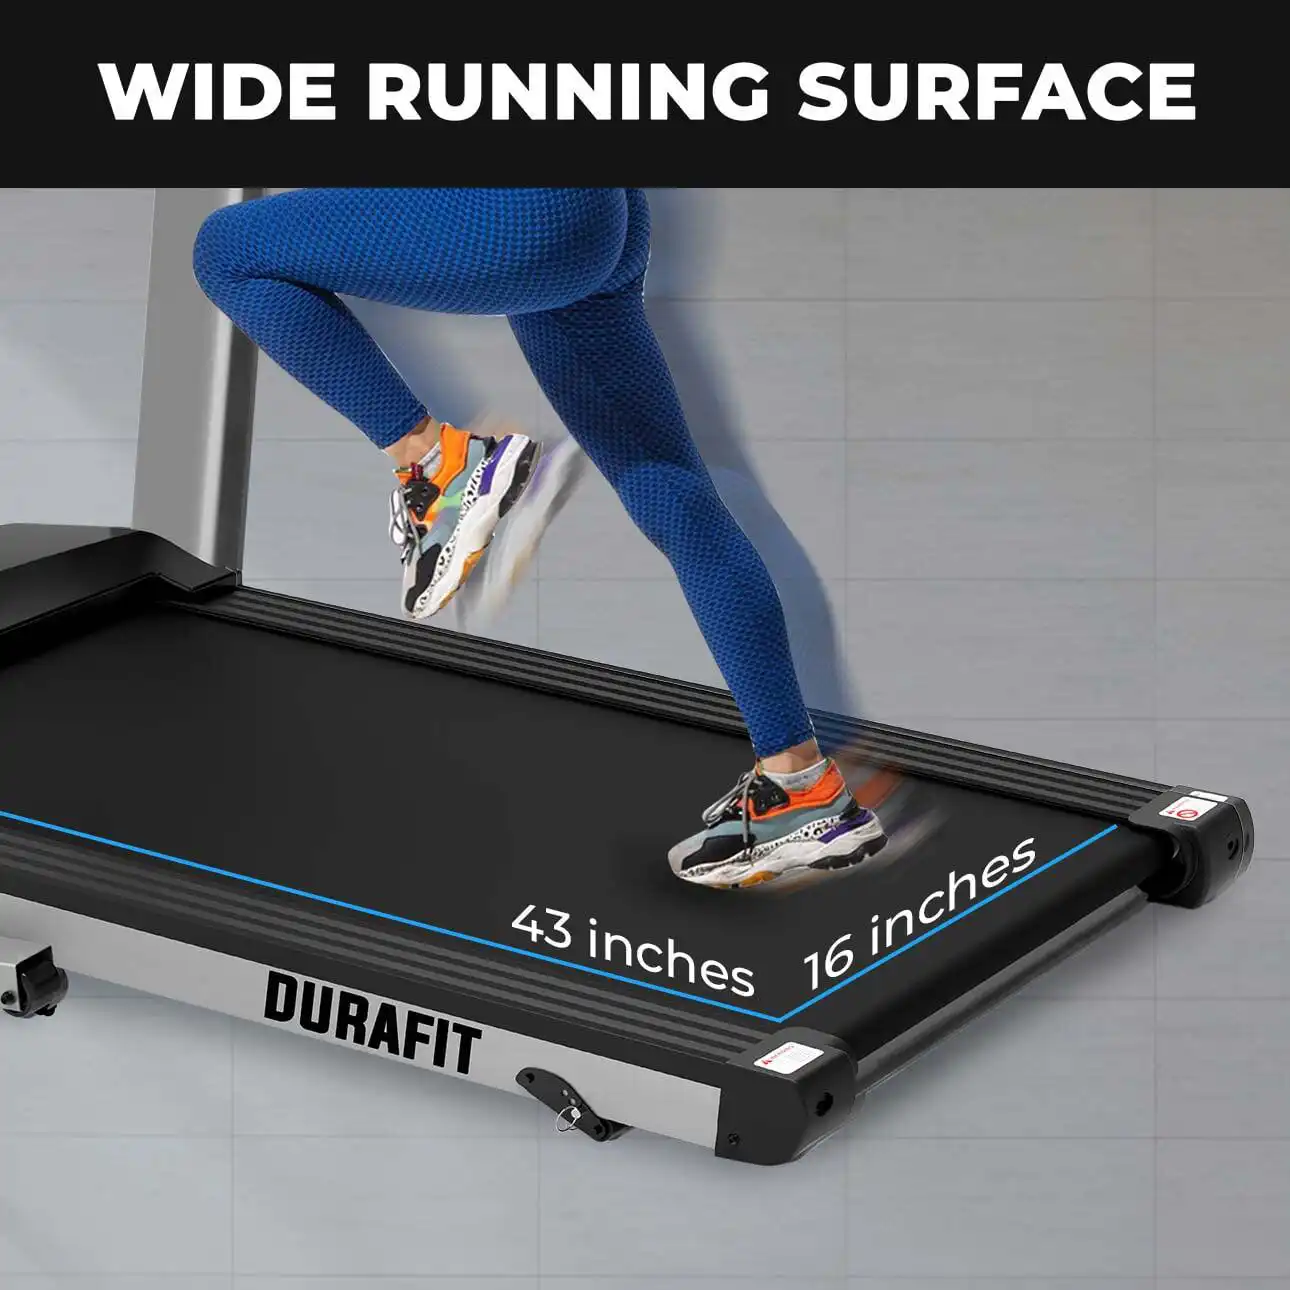 Durafit Strong treadmill with Wide Running Surface